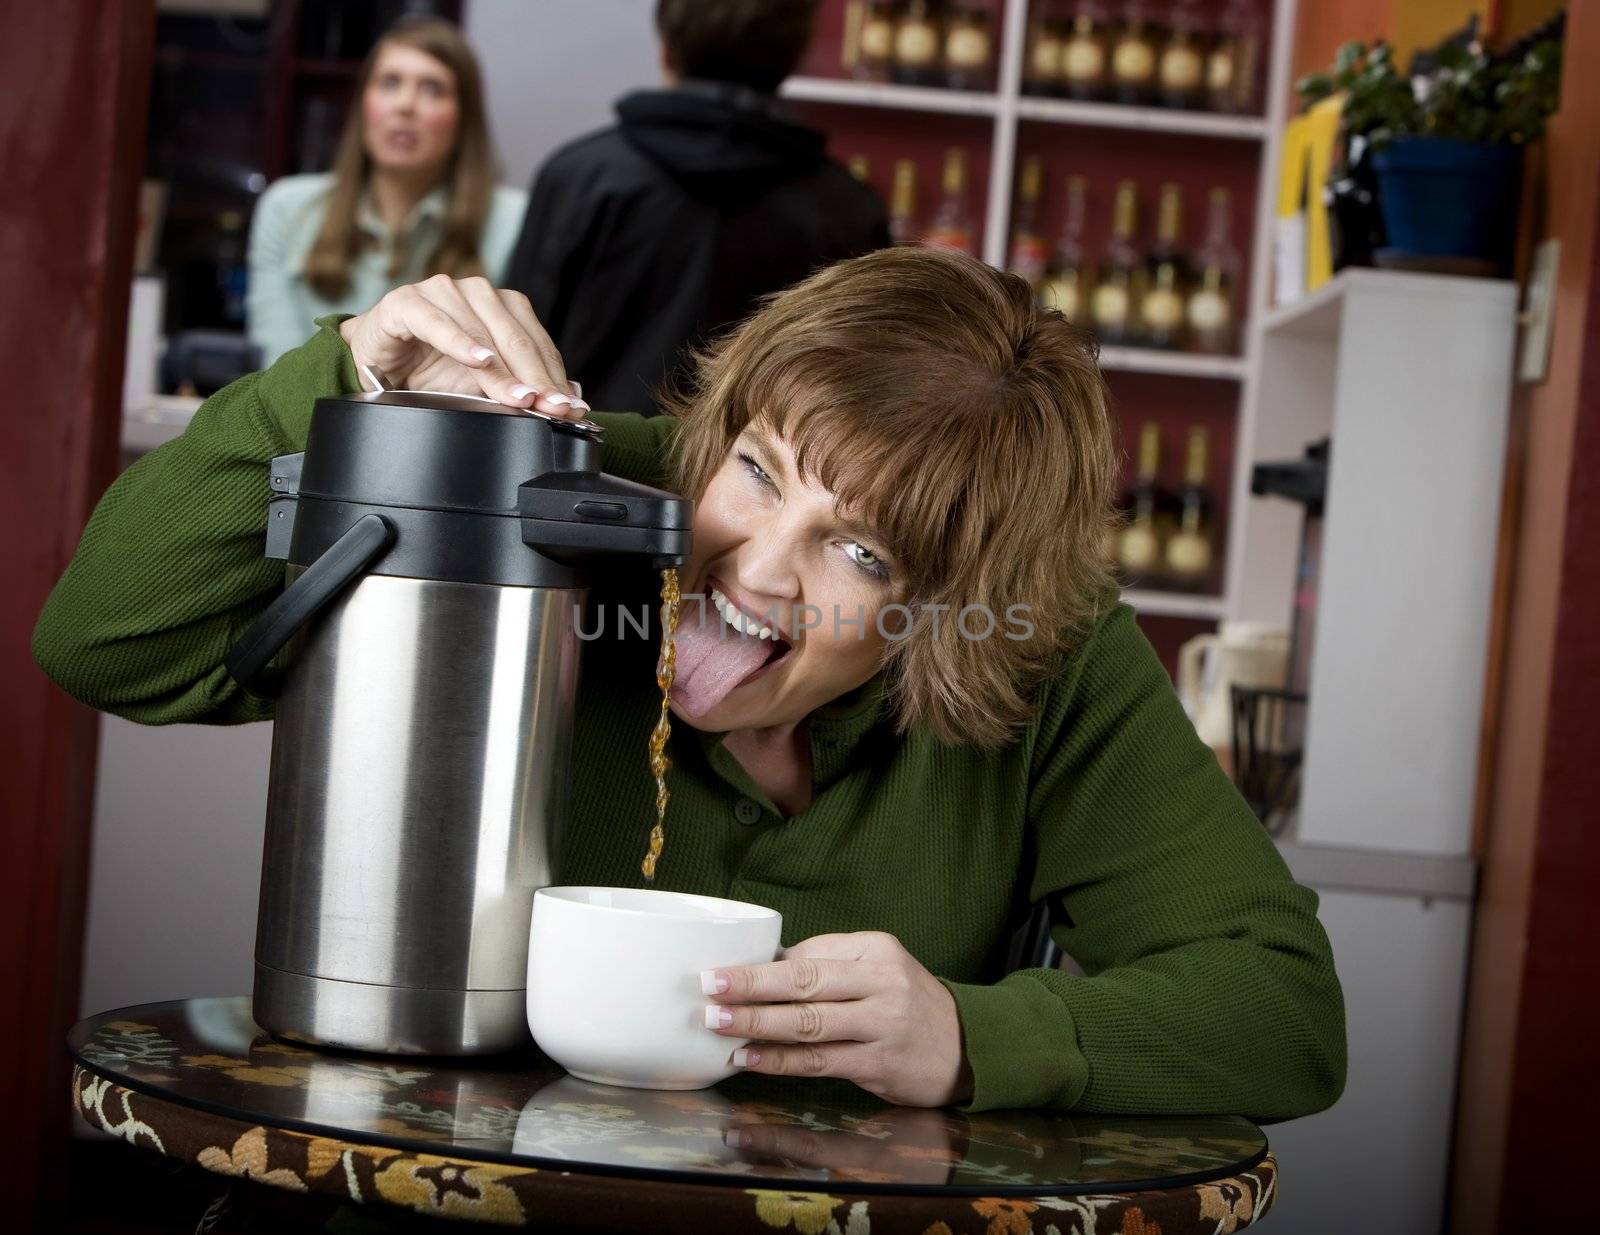 Woman drinking coffee directly from a beverage dispenser